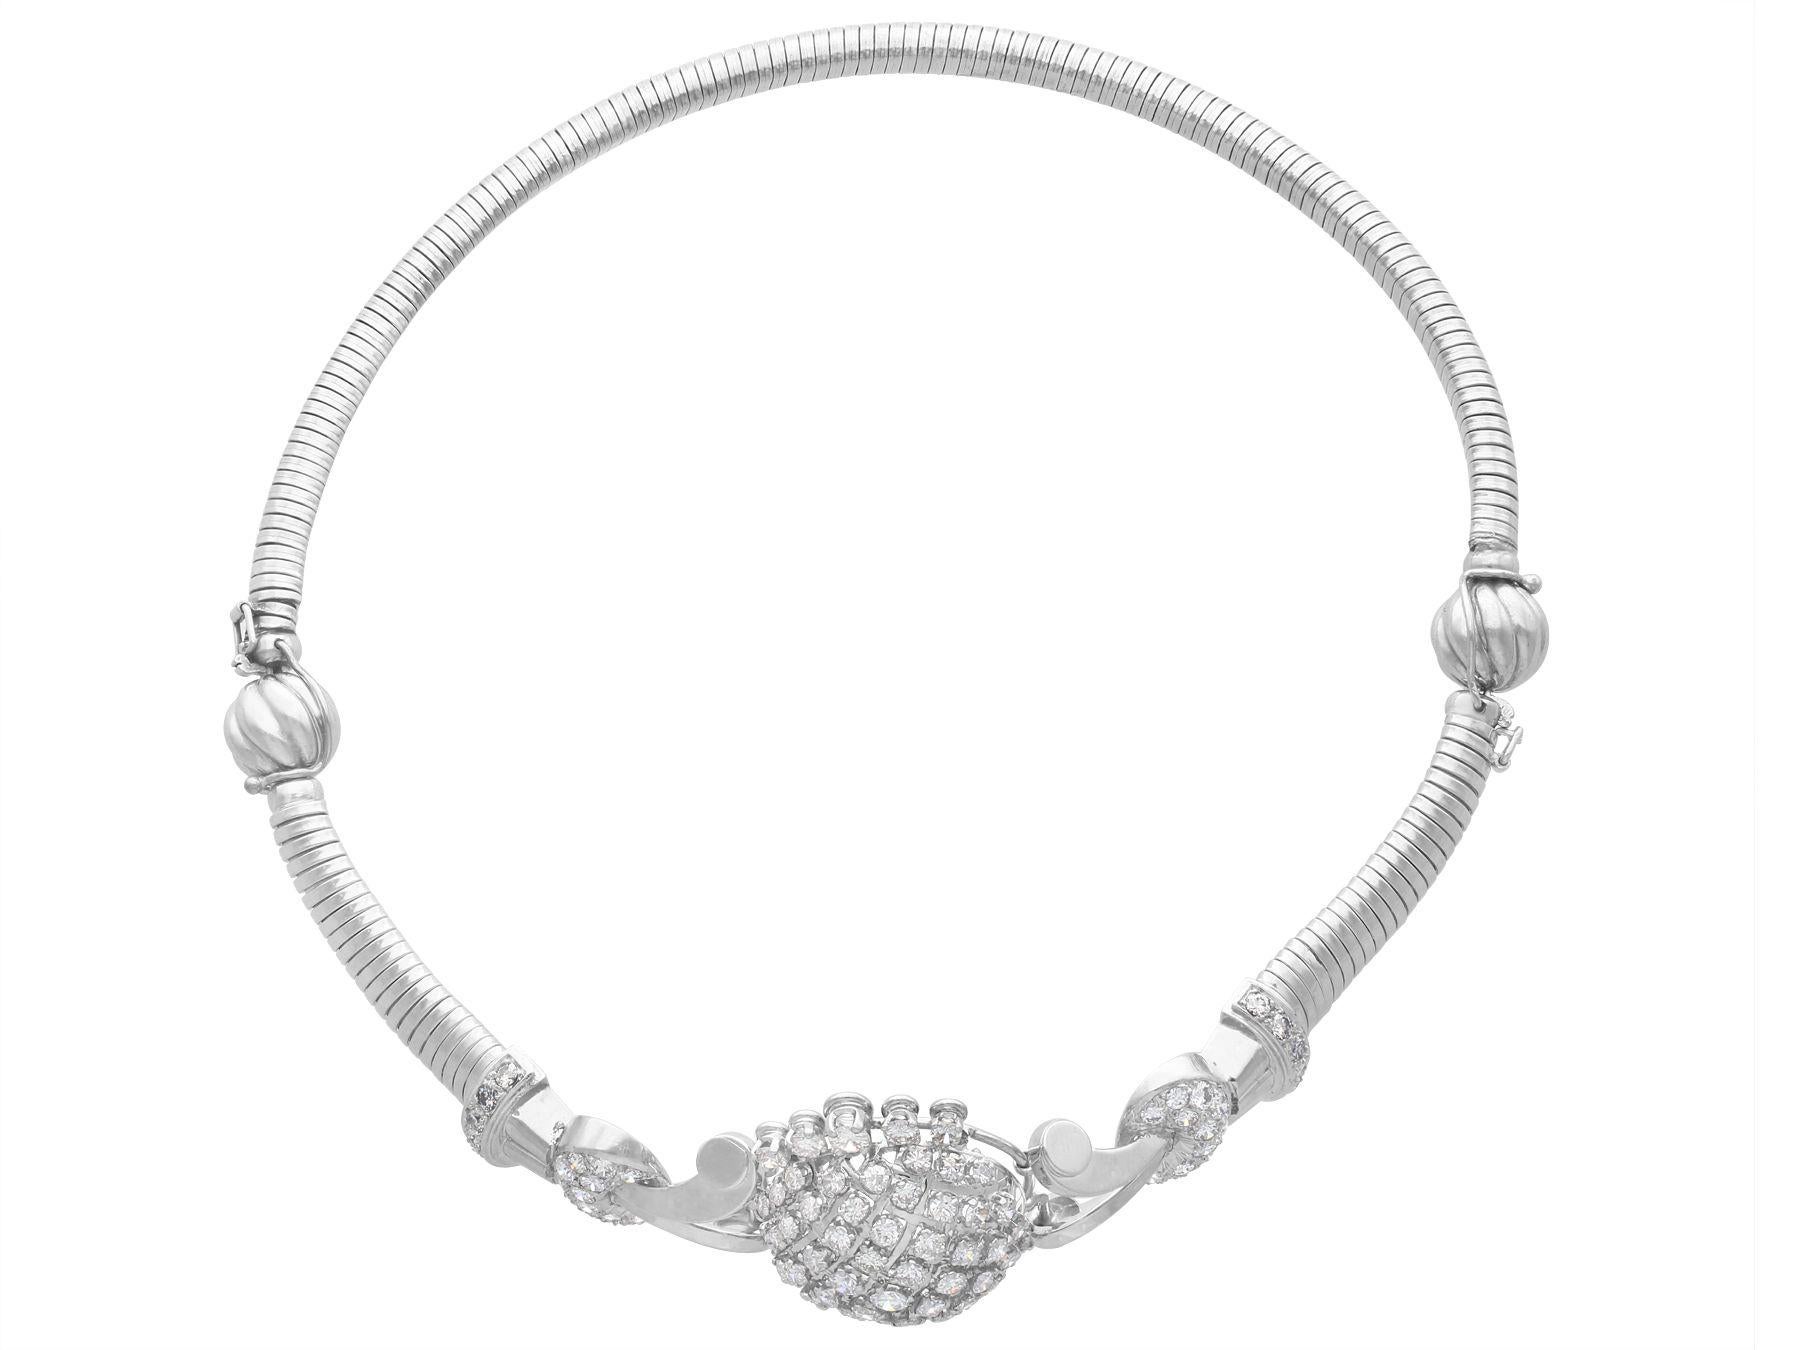 French Art Deco 6.68 Carat Diamond and White Gold Necklace Bracelet For Sale 2